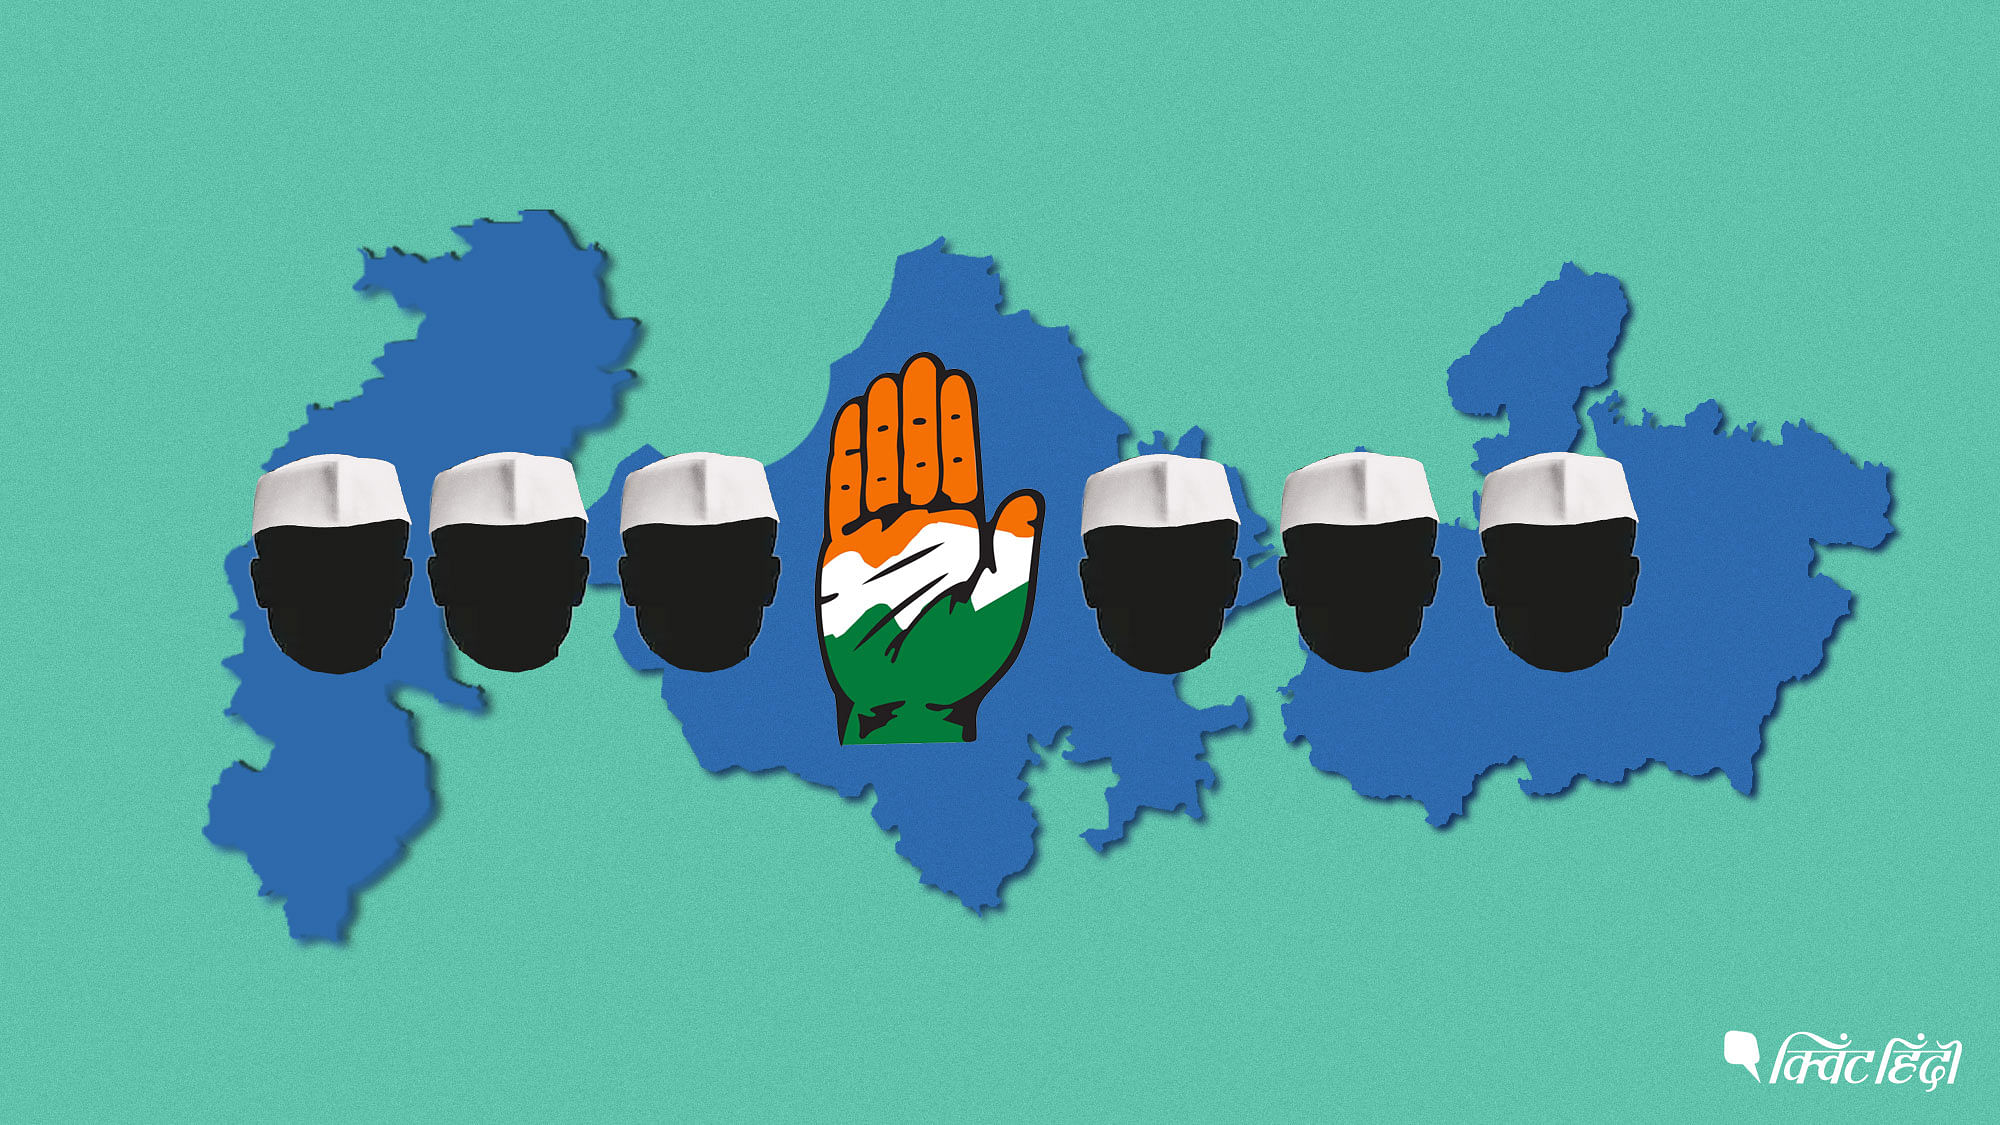 The Congress has multiple faces in Rajasthan, Madhya Pradesh and Chhattisgarh who could become chief ministers.&nbsp;